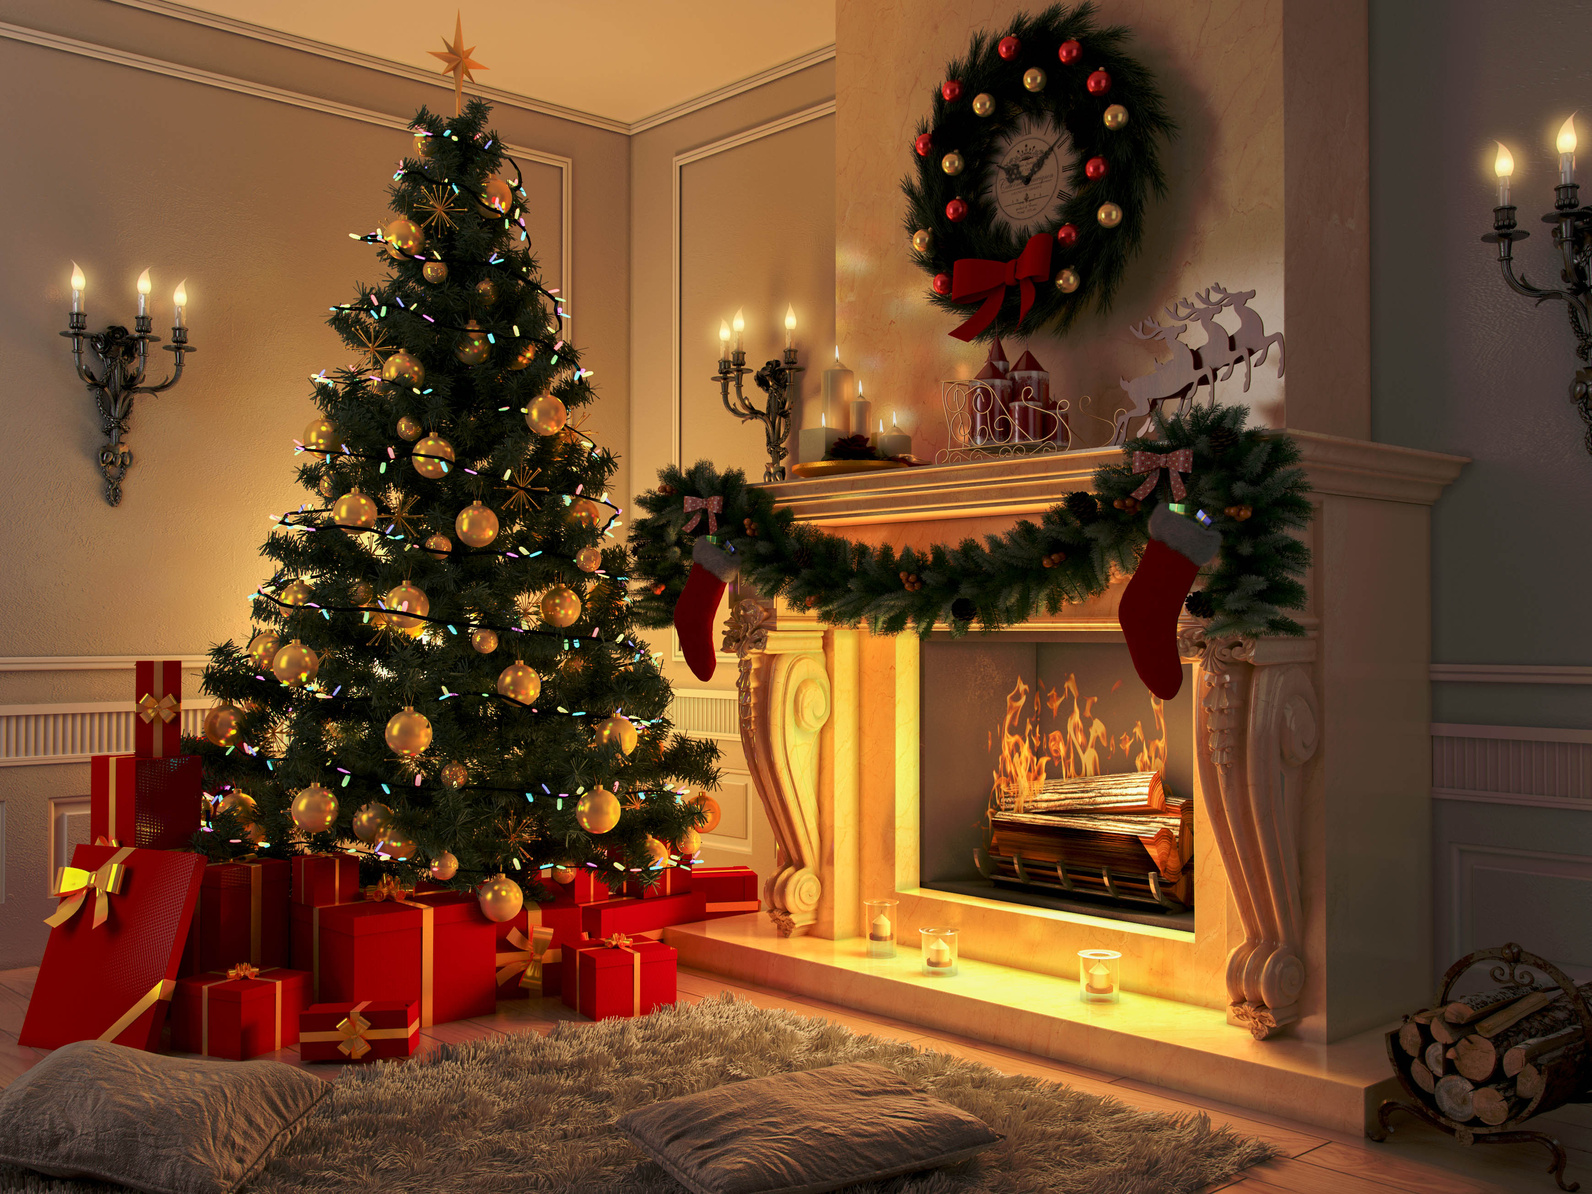 11 Indoor Holiday Decorating Ideas - Wasatch Shutter